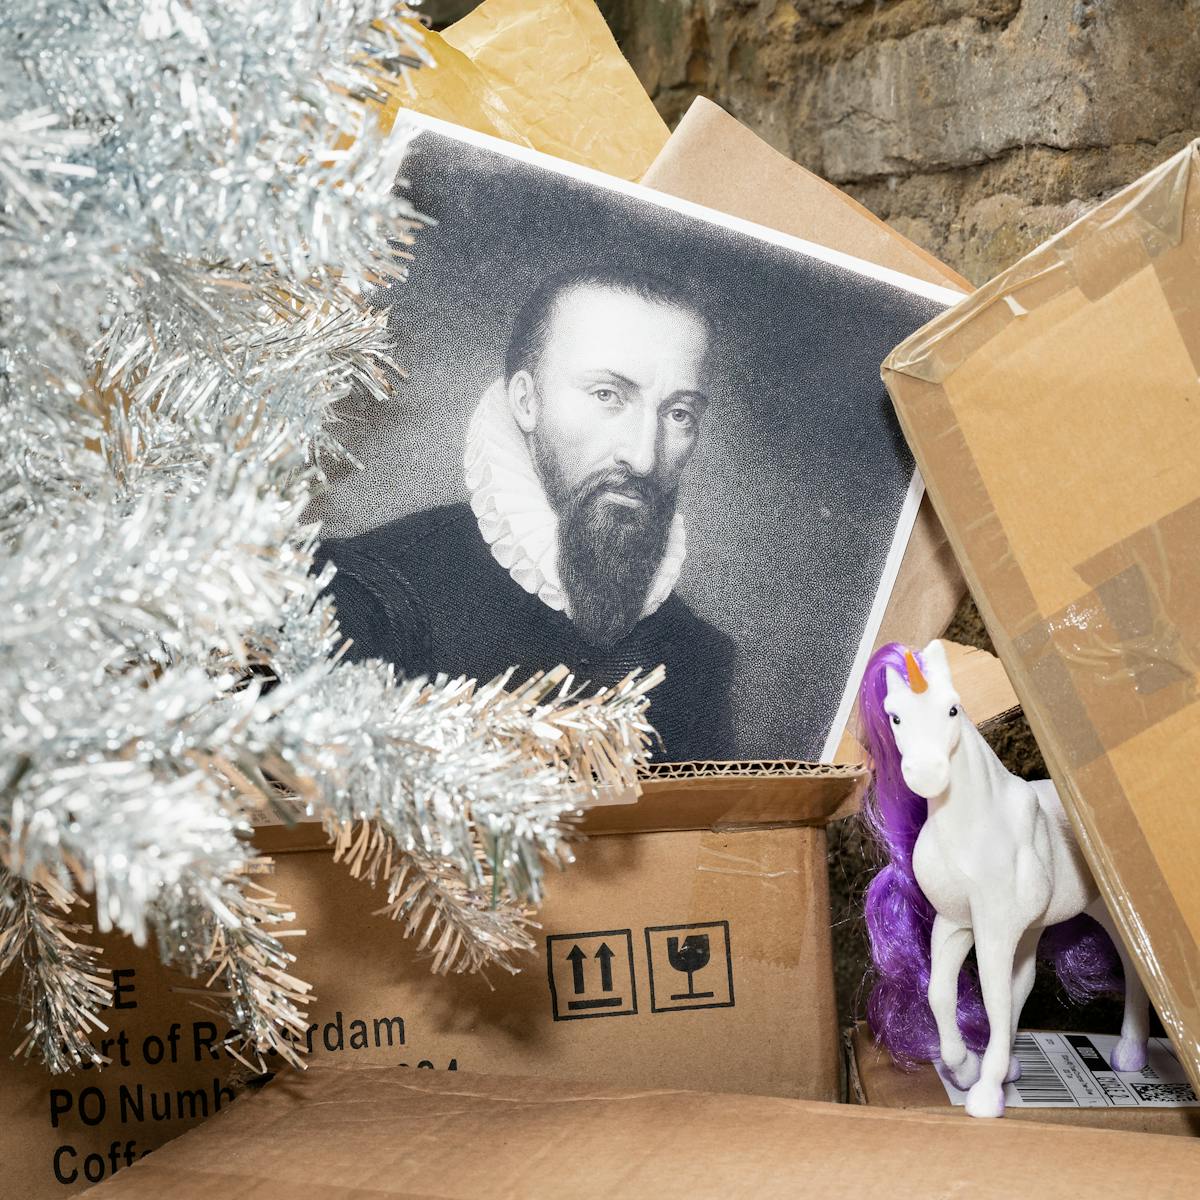 Photograph of a pile of brown cardboard boxes quite closeup. Next to the boxes on the left is part of a silver tinselled Christmas tree, bare of decorations. Sticking out of one of the cardboard boxes is a balck and white print of a bearded mad with a ruff from the 16th century. One the right hand side, appearing from behind a box is a white plastic unicorn figurine with an orange horn and a purple mane.  